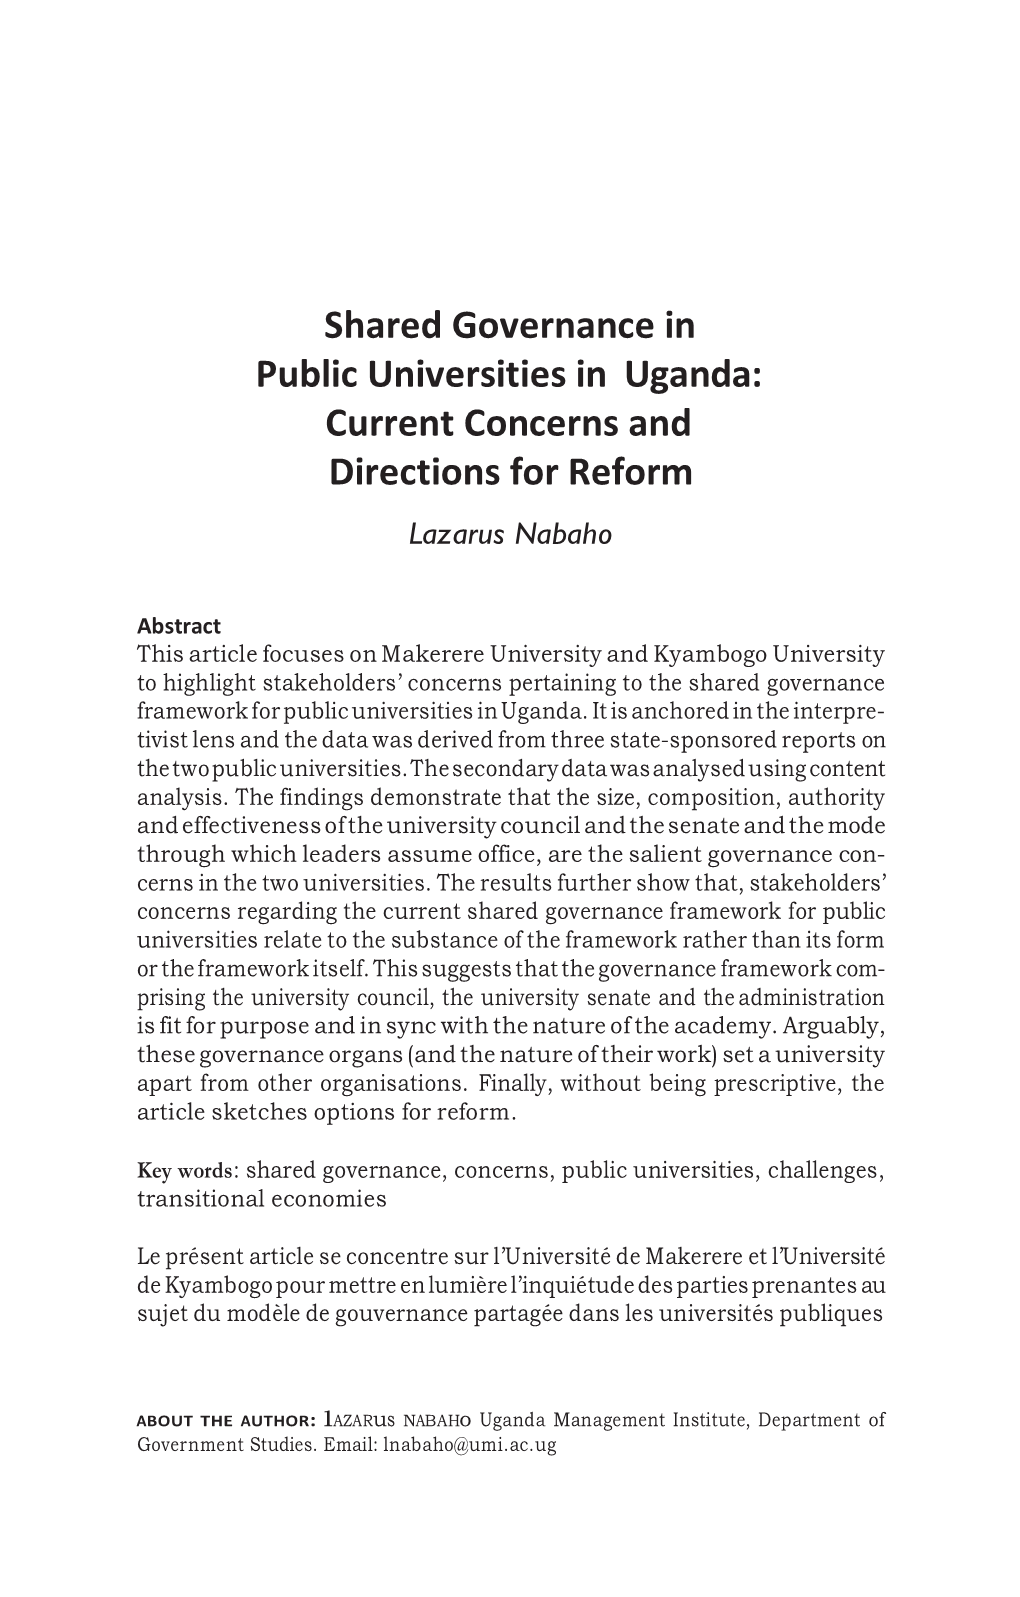 Shared Governance in Public Universities in Uganda: Current Concerns and Directions for Reform Lazarus Nabaho